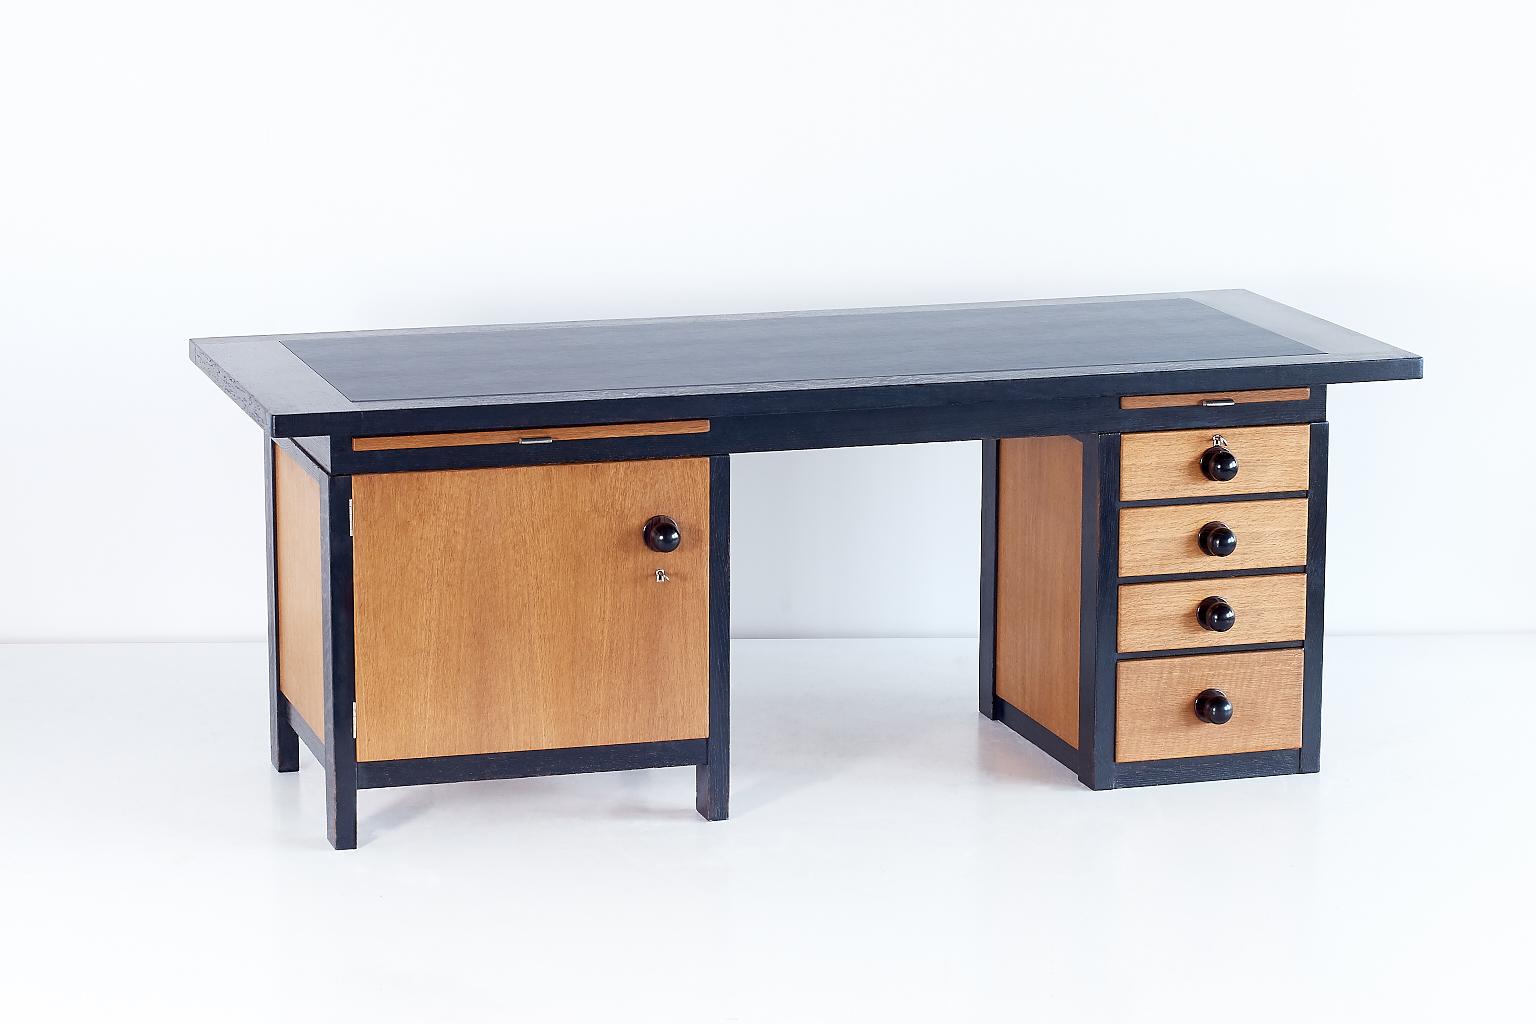 This unique architect's desk was designed by Frits Spanjaard in 1932. With its generous proportions, striking asymmetry, contrasting woods and the large knobs in solid Macassar ebony, the desk can be considered as an important example of the Haagse